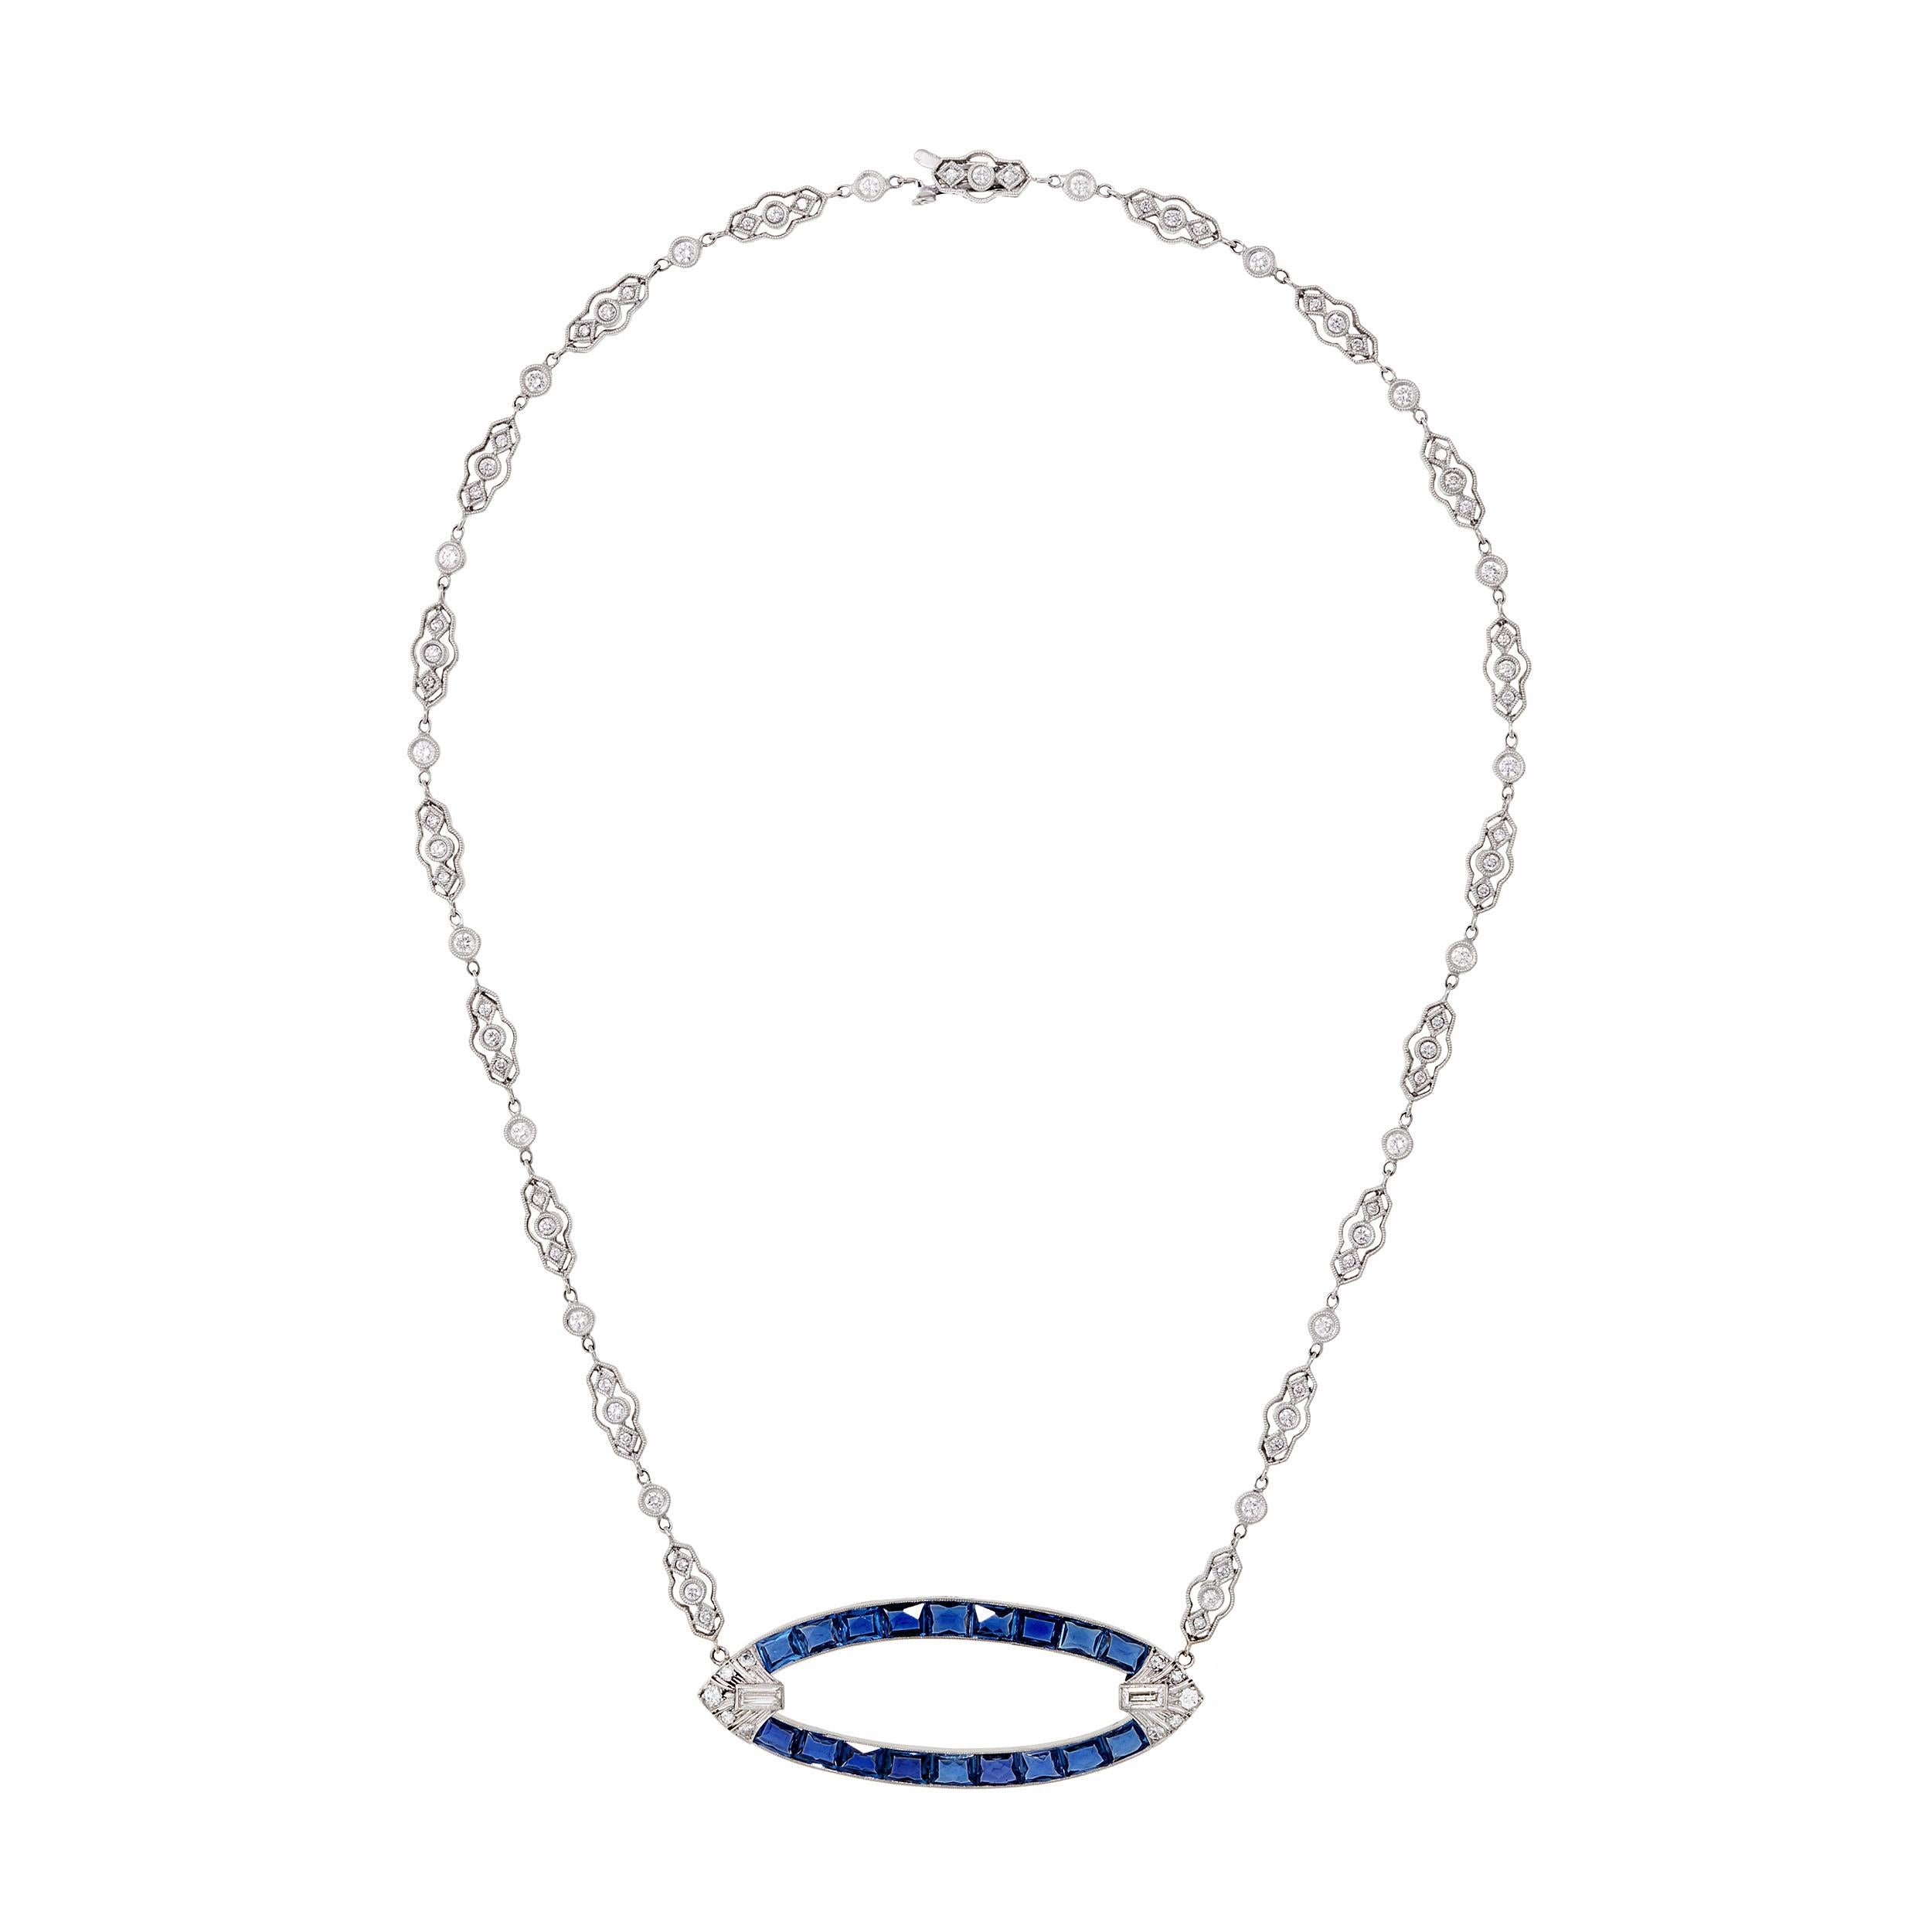 What an incredible necklace holding the most desirable Montana Sapphires from the Yogo Gulch mine.  Montana Sapphires are already a prized and rare material.  The Yogo Gulch mine produced the best color and quality sapphires of them all, making this